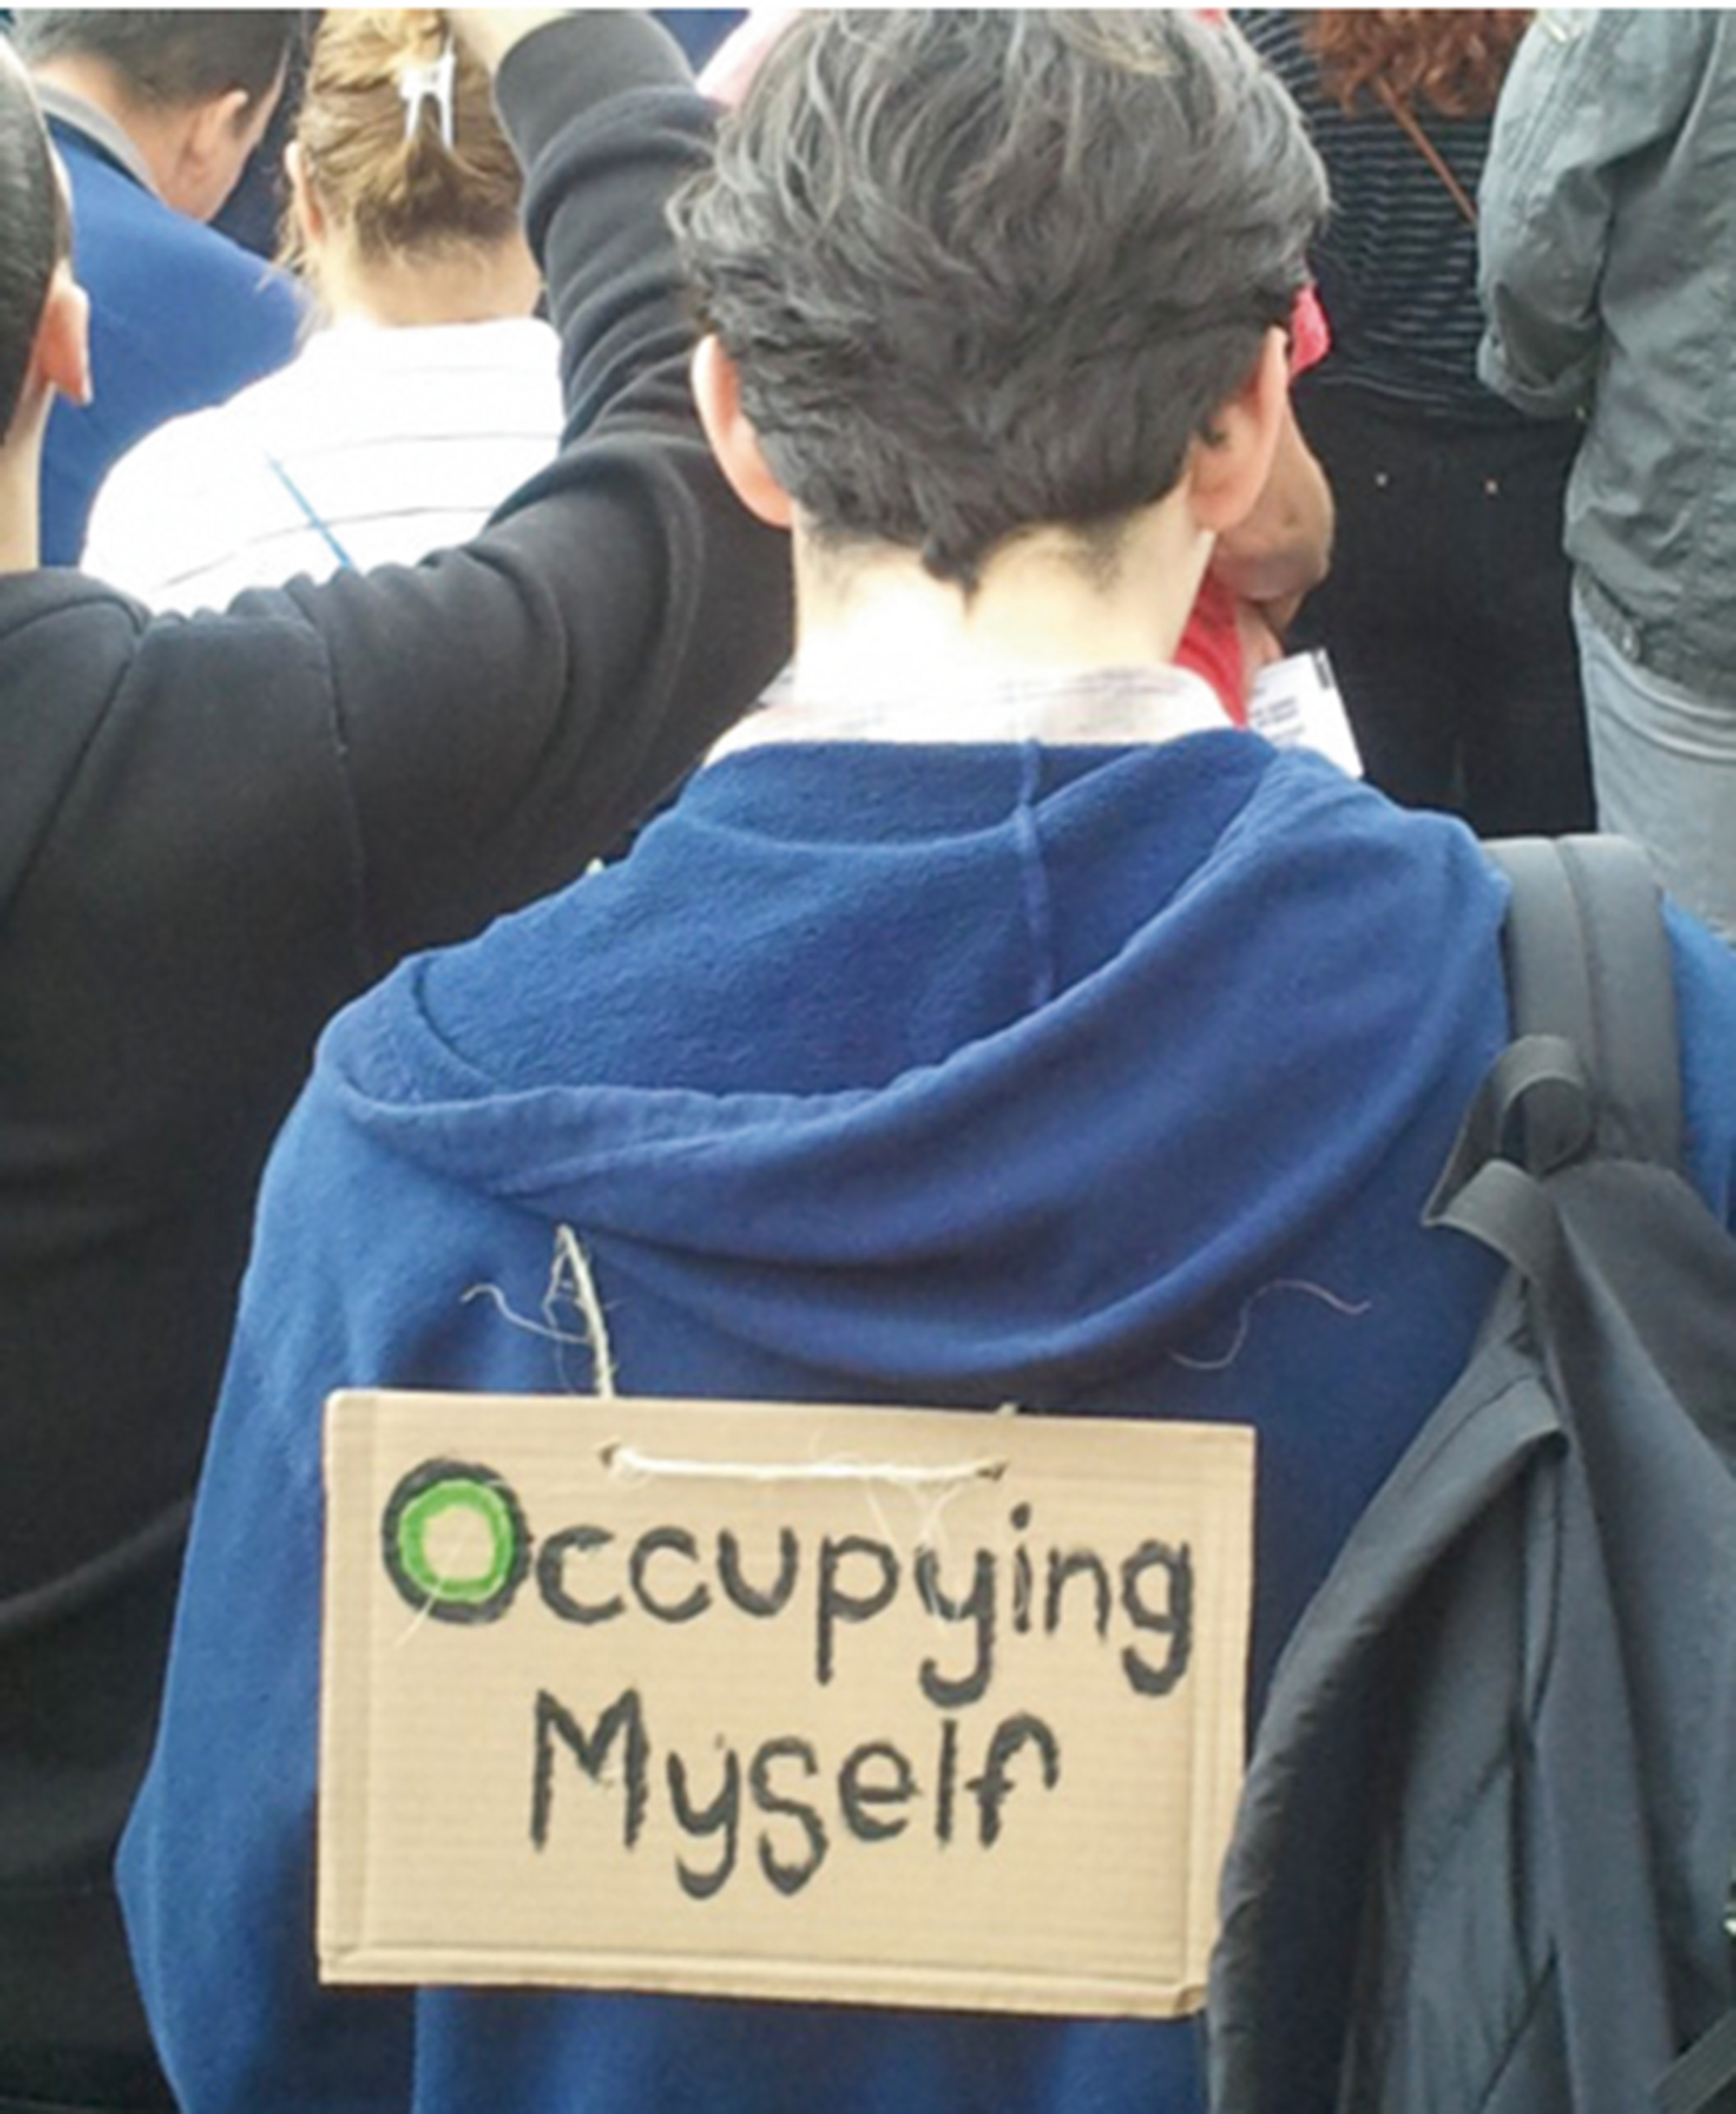 A twenty eleven photograph of a person wearing a protest sign that reads “Occupying myself.”